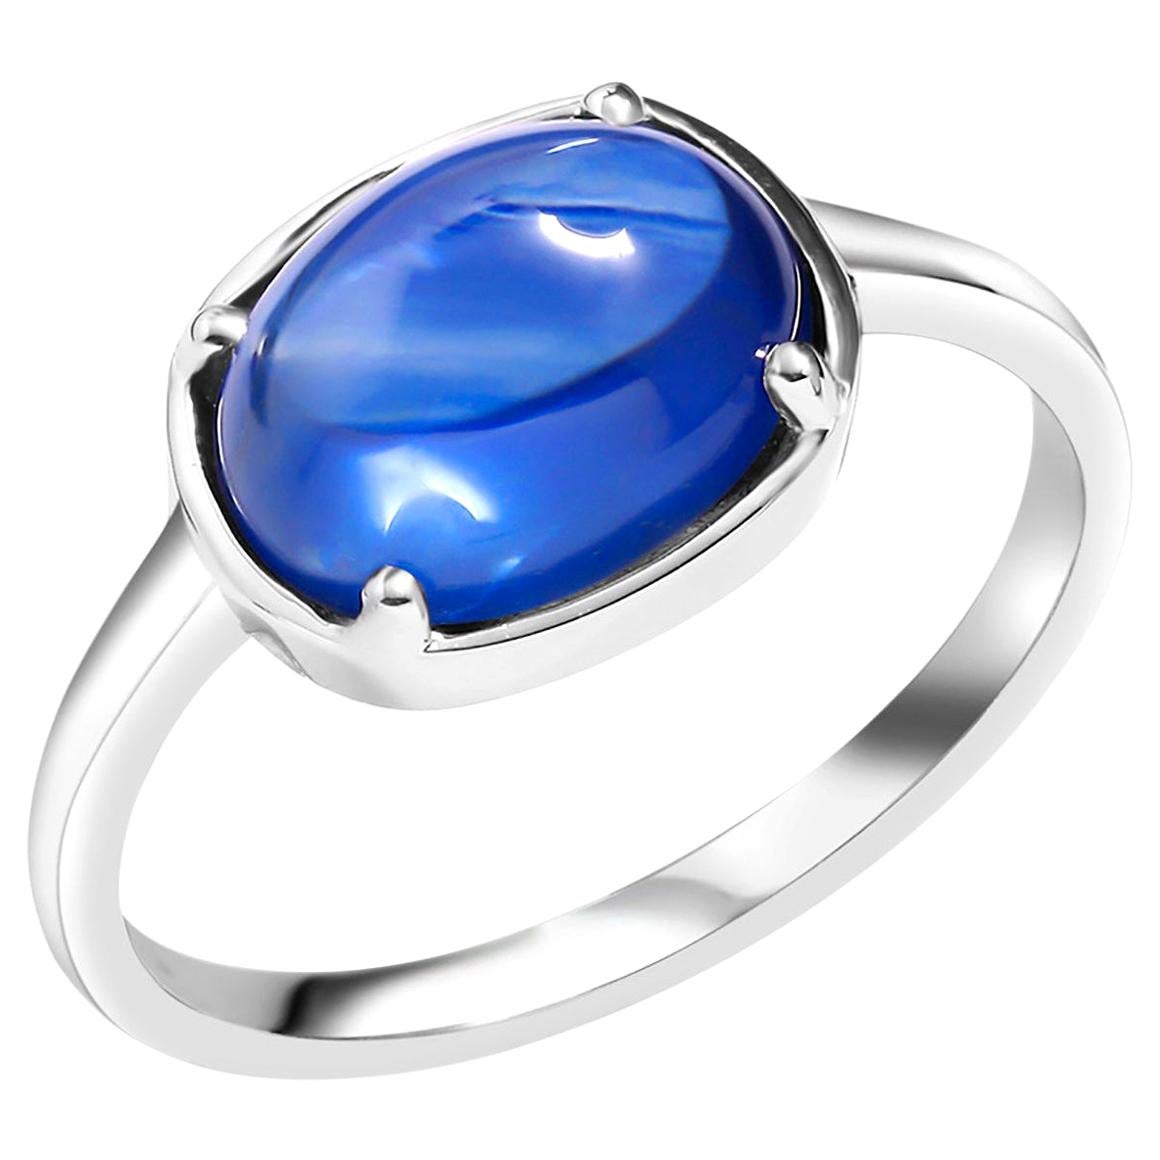 Ceylon Cabochon Sapphire Weighing 4.25 Carat White Gold Cocktail Ring